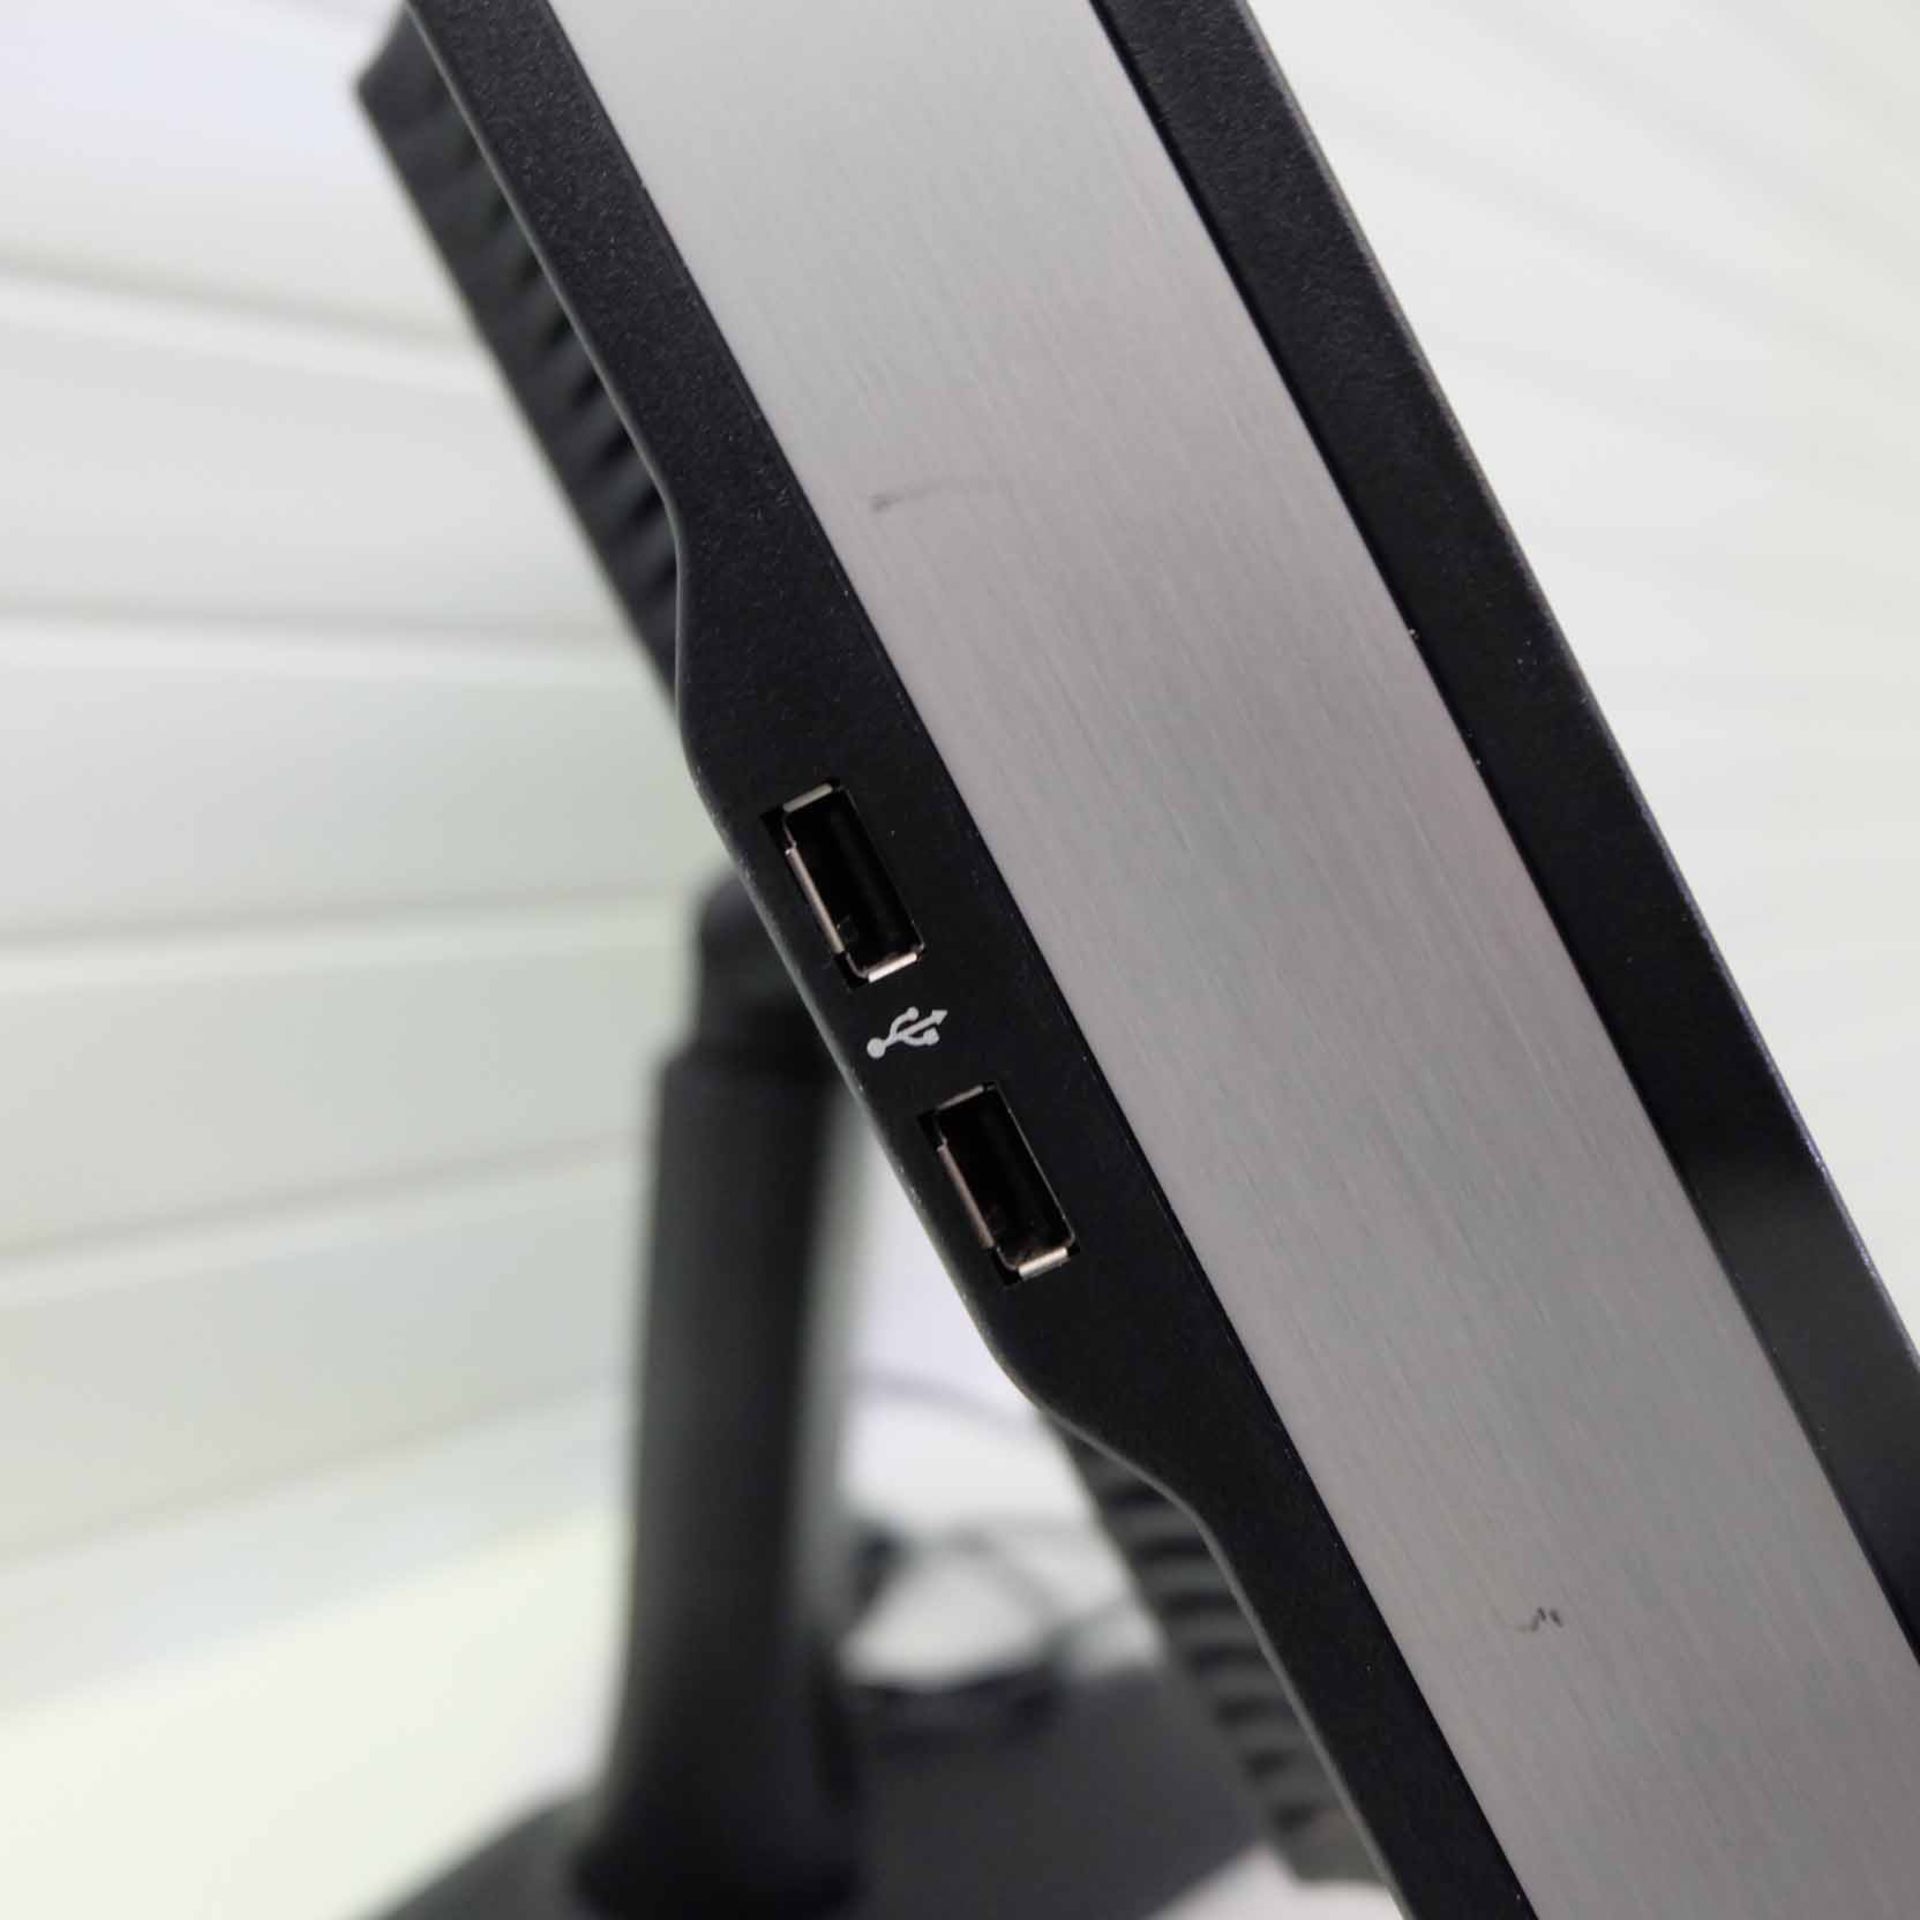 HP Model HPZR30W LCD Computer Monitor. Size 30". Tilting and Swivelling. - Image 5 of 10